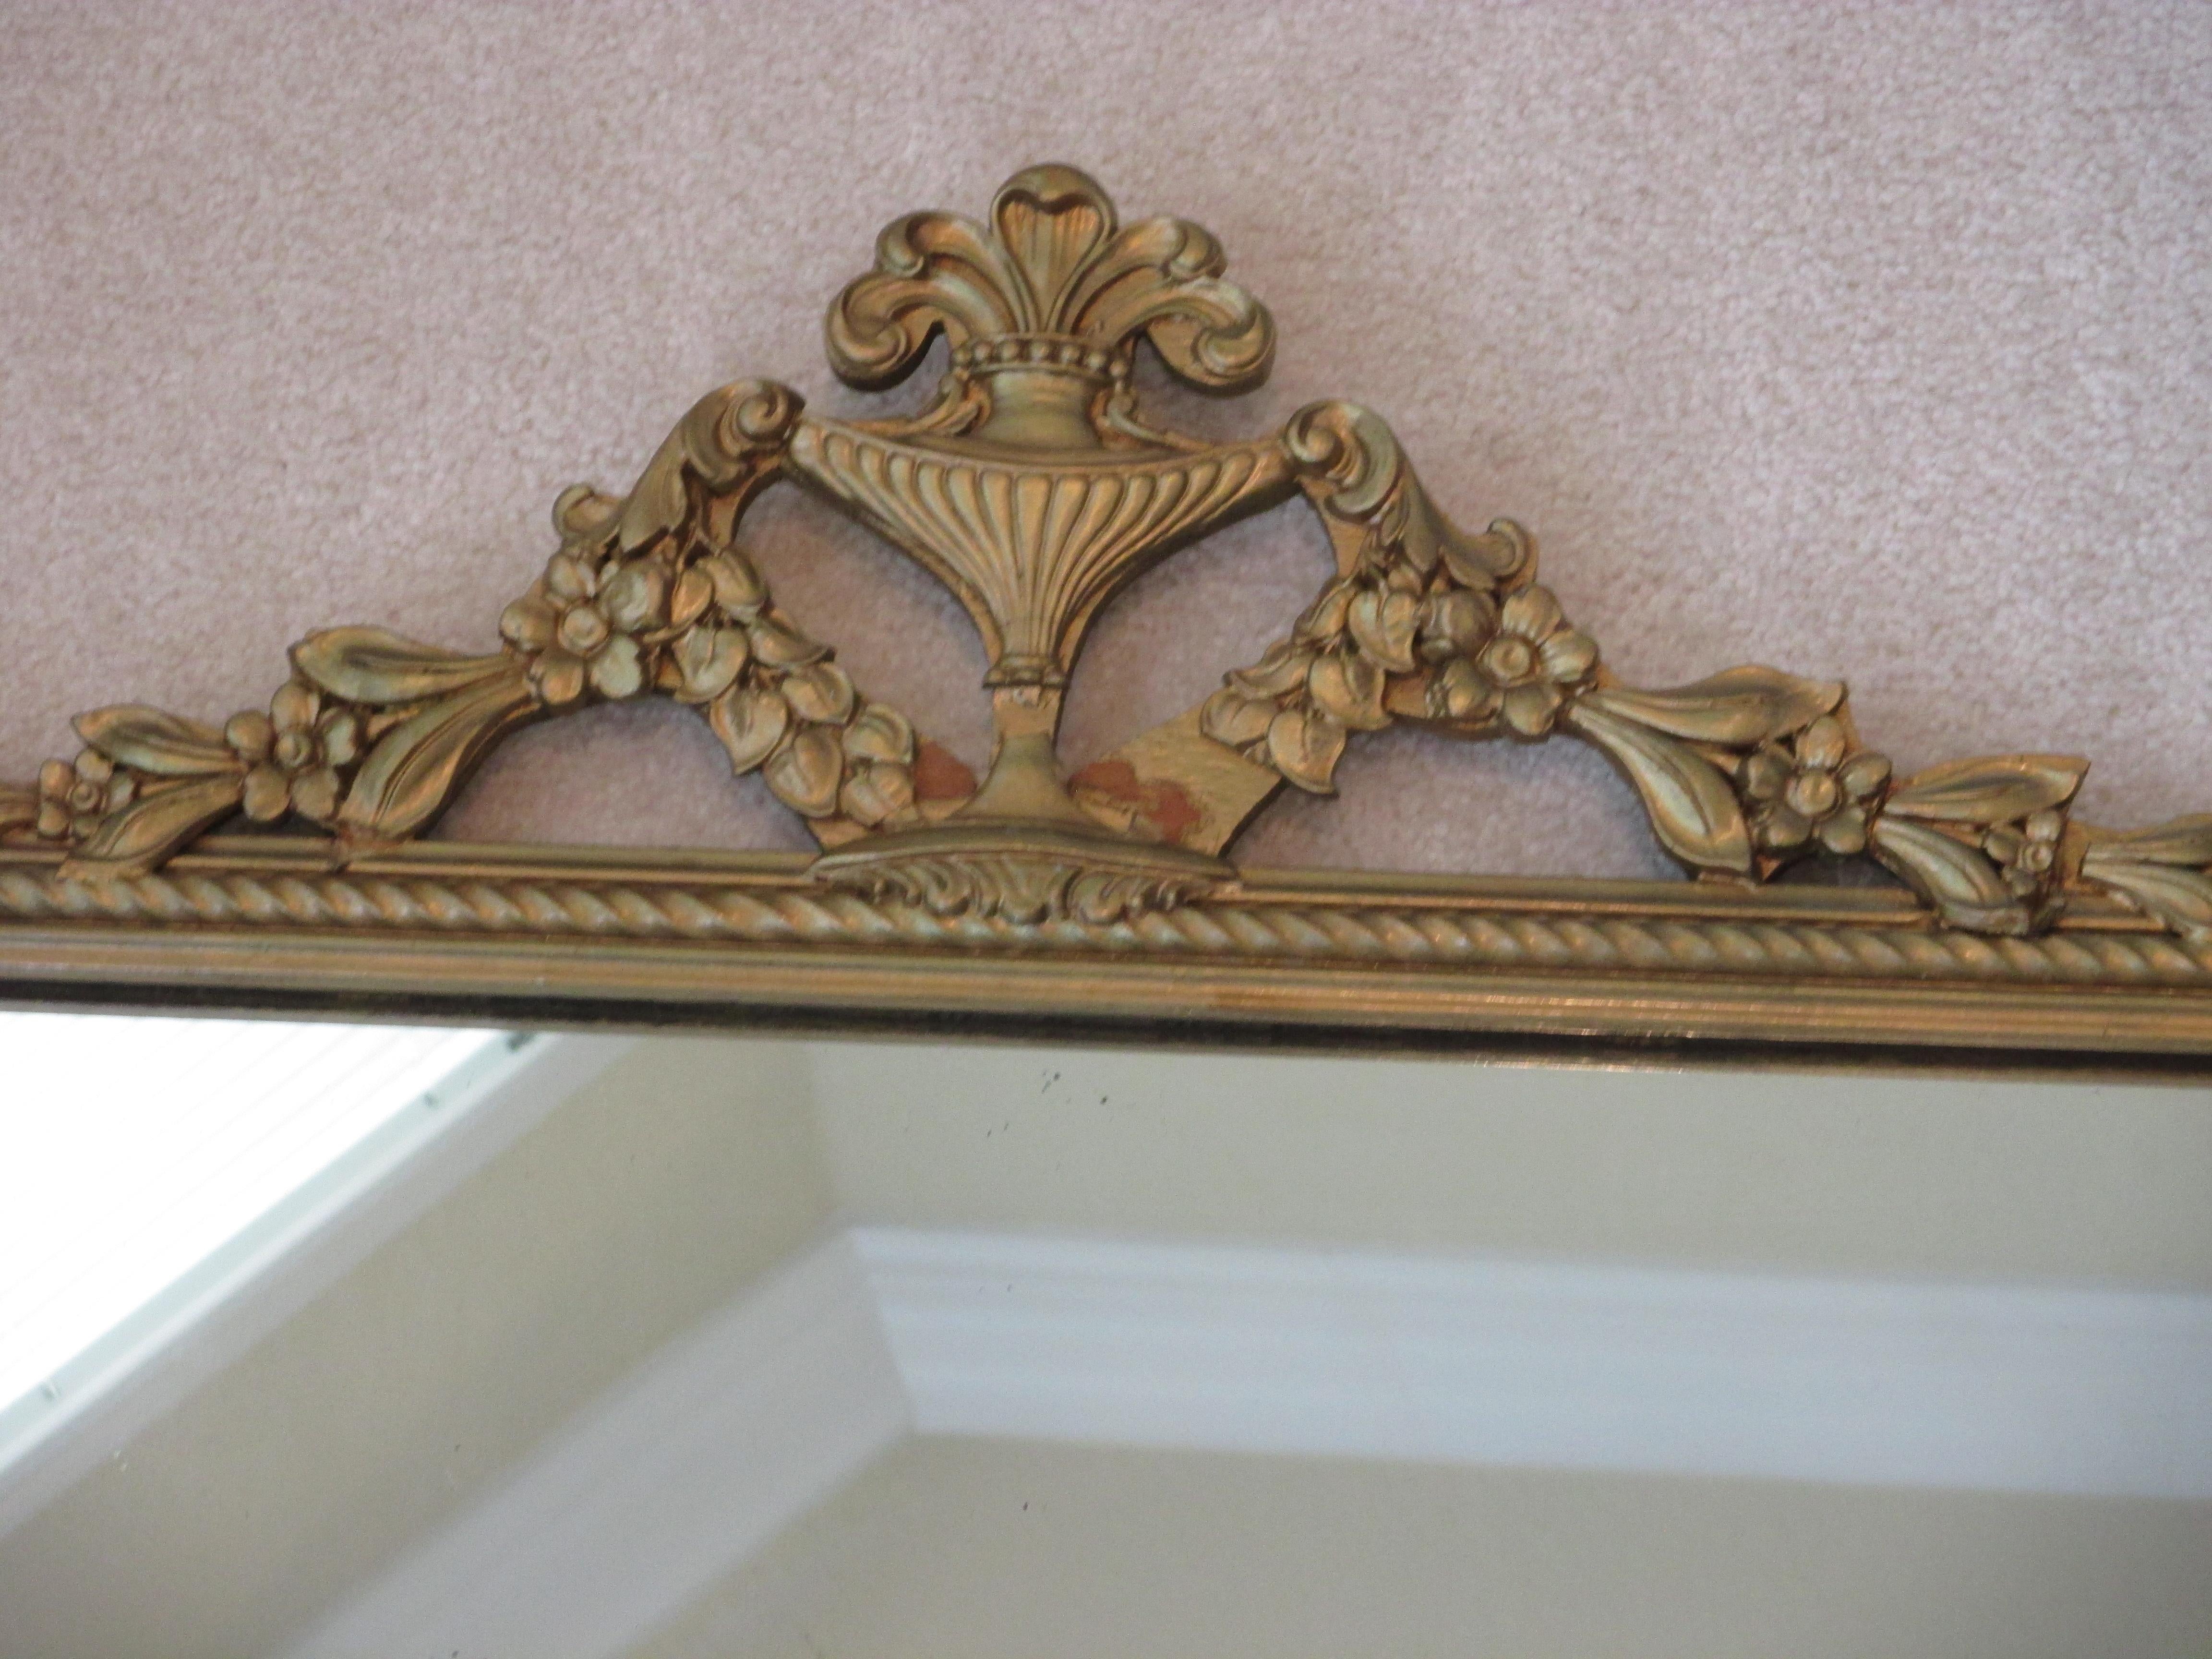 Beautiful vintage gold wooden mirror with ornate trim. Hanging hardware is attached.